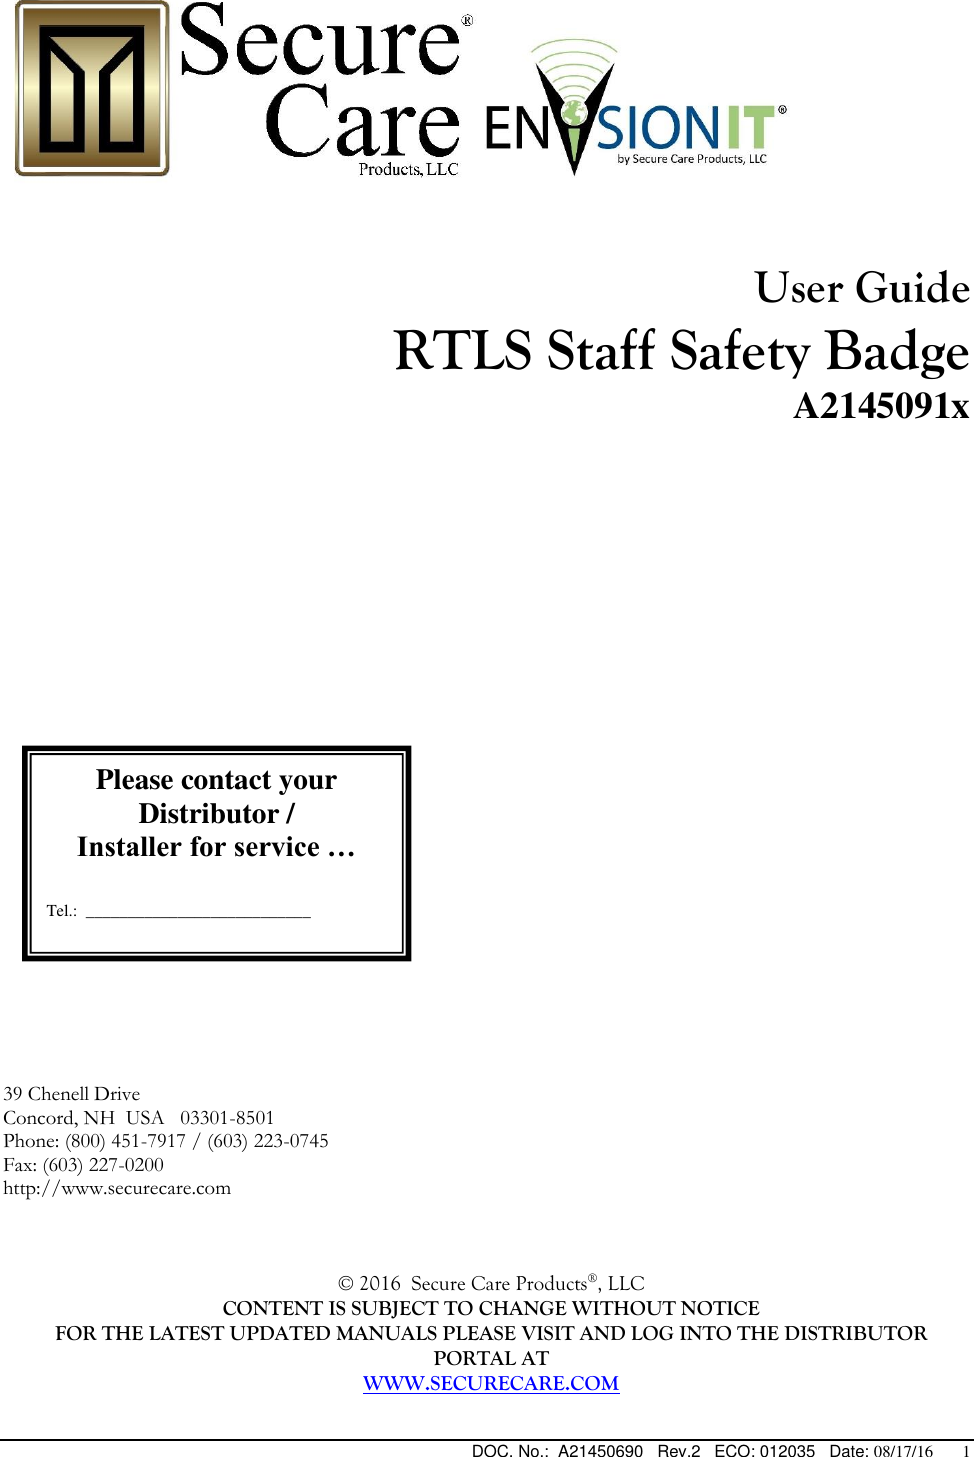  DOC. No.:  A21450690   Rev.2   ECO: 012035   Date: 08/17/16       1      User Guide  RTLS Staff Safety Badge A2145091x                             39 Chenell Drive  Concord, NH  USA   03301-8501   Phone: (800) 451-7917 / (603) 223-0745 Fax: (603) 227-0200 http://www.securecare.com    © 2016  Secure Care Products®, LLC  CONTENT IS SUBJECT TO CHANGE WITHOUT NOTICE FOR THE LATEST UPDATED MANUALS PLEASE VISIT AND LOG INTO THE DISTRIBUTOR PORTAL AT WWW.SECURECARE.COM  Please contact your Distributor / Installer for service …   Tel.:  ___________________________  